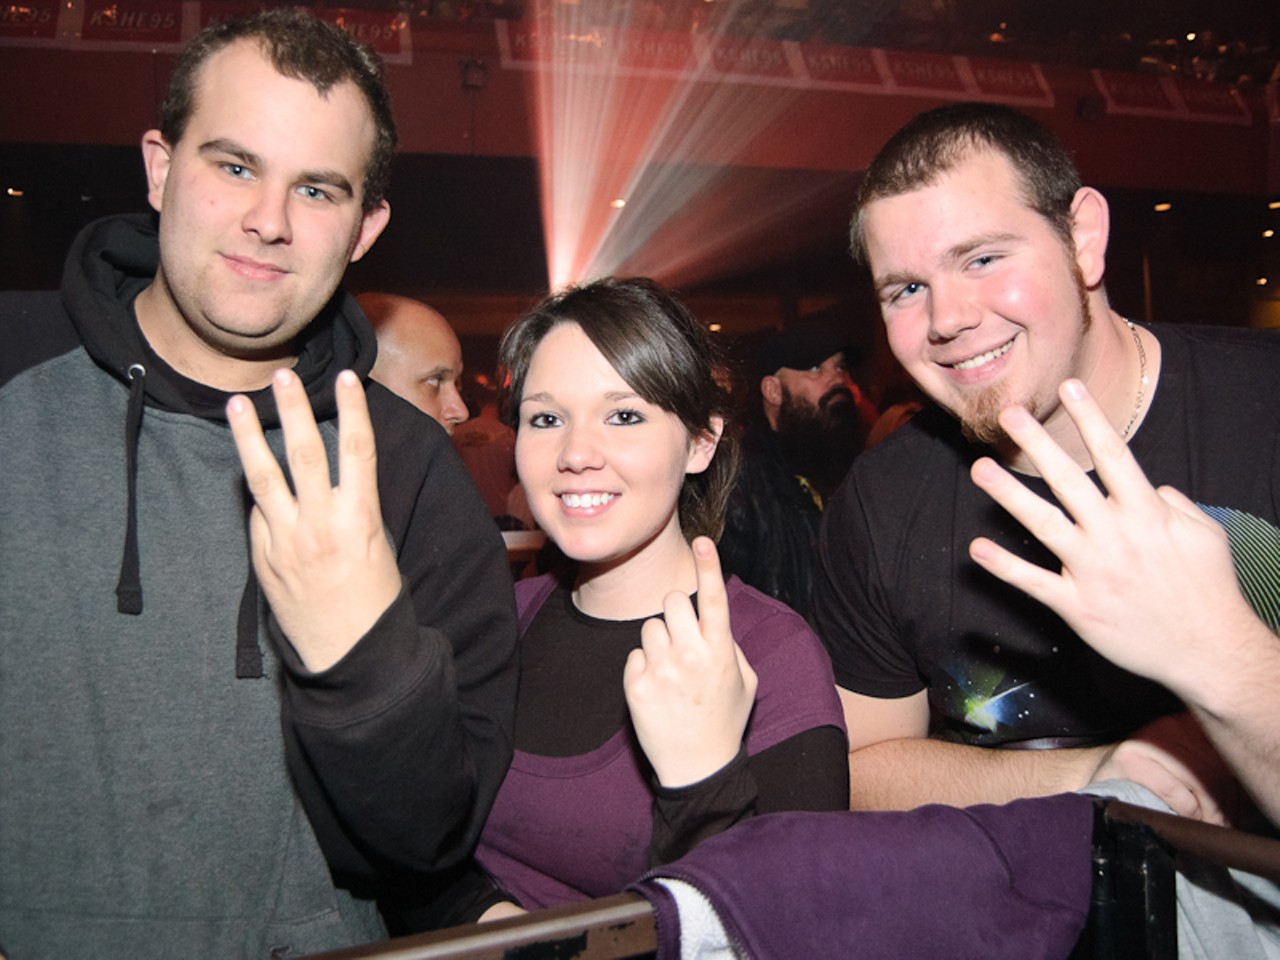 Chad Hanebrink, Loretta Williams and Greg McDaniels show us how many times they've been to the annual El Monstero show.